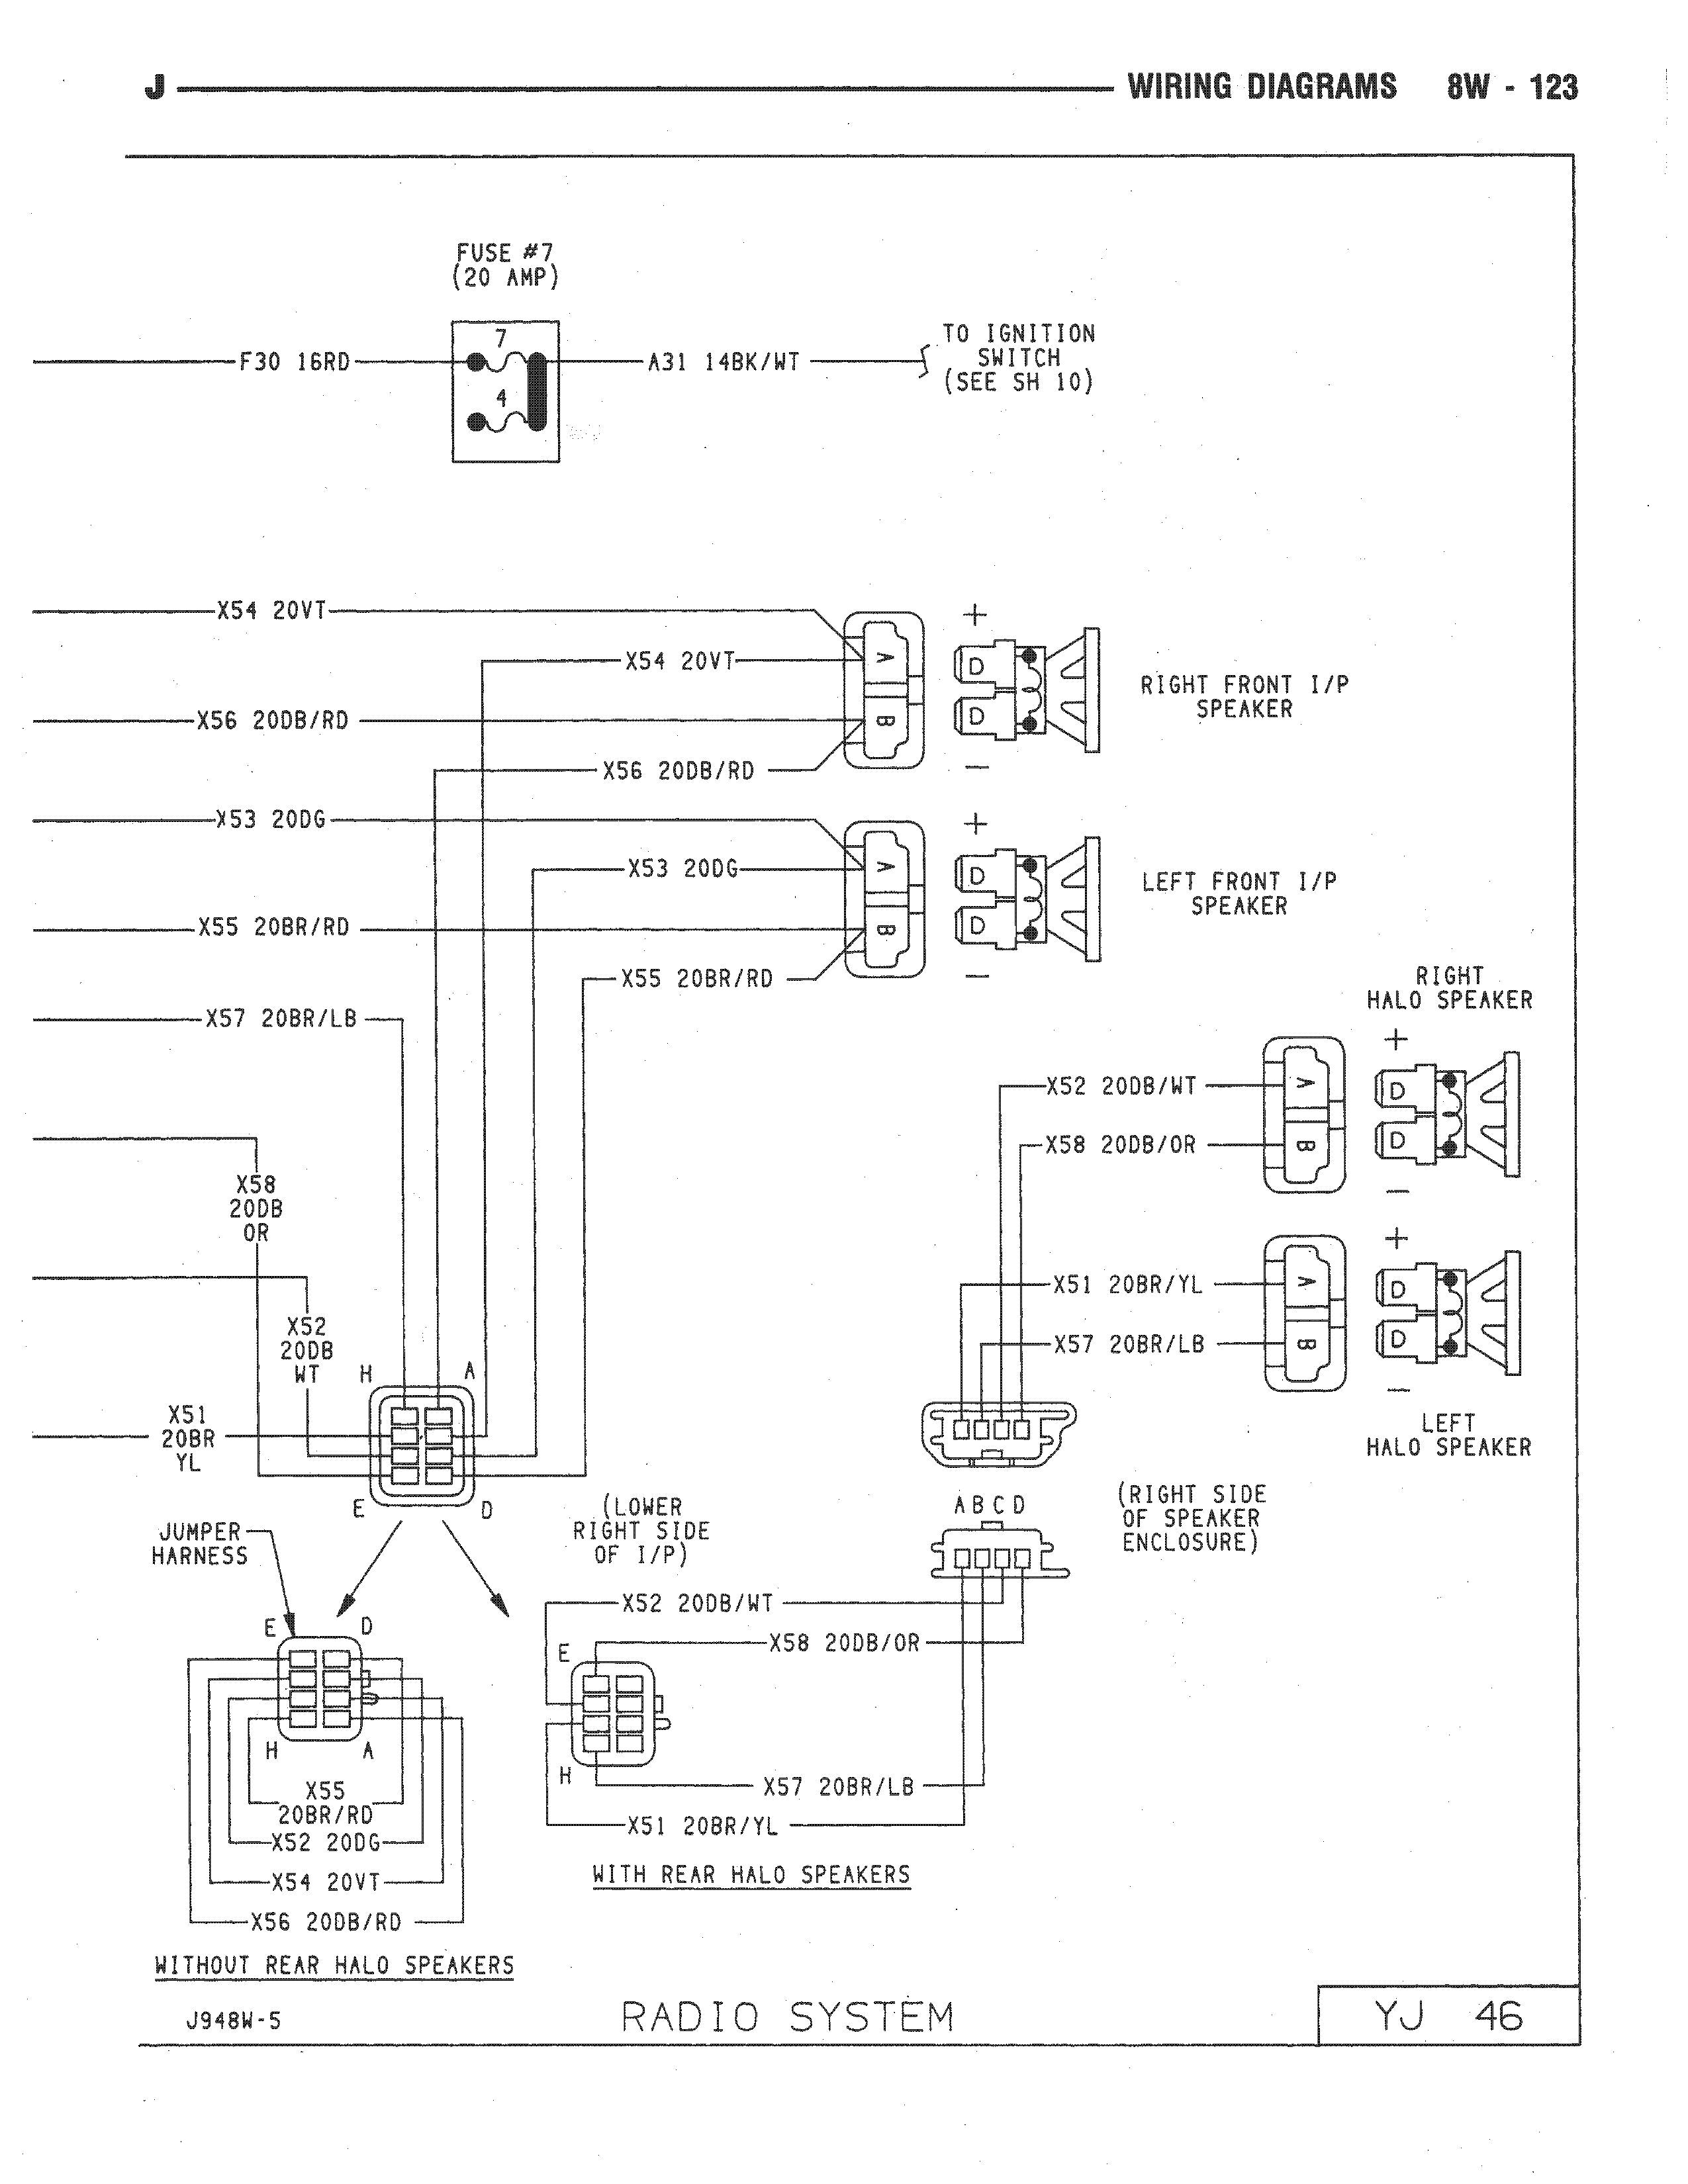 installation of the trailer wiring harness on a 2008 jeep liberty how to wire speakers diagram in addition jeep headlight switch wiring